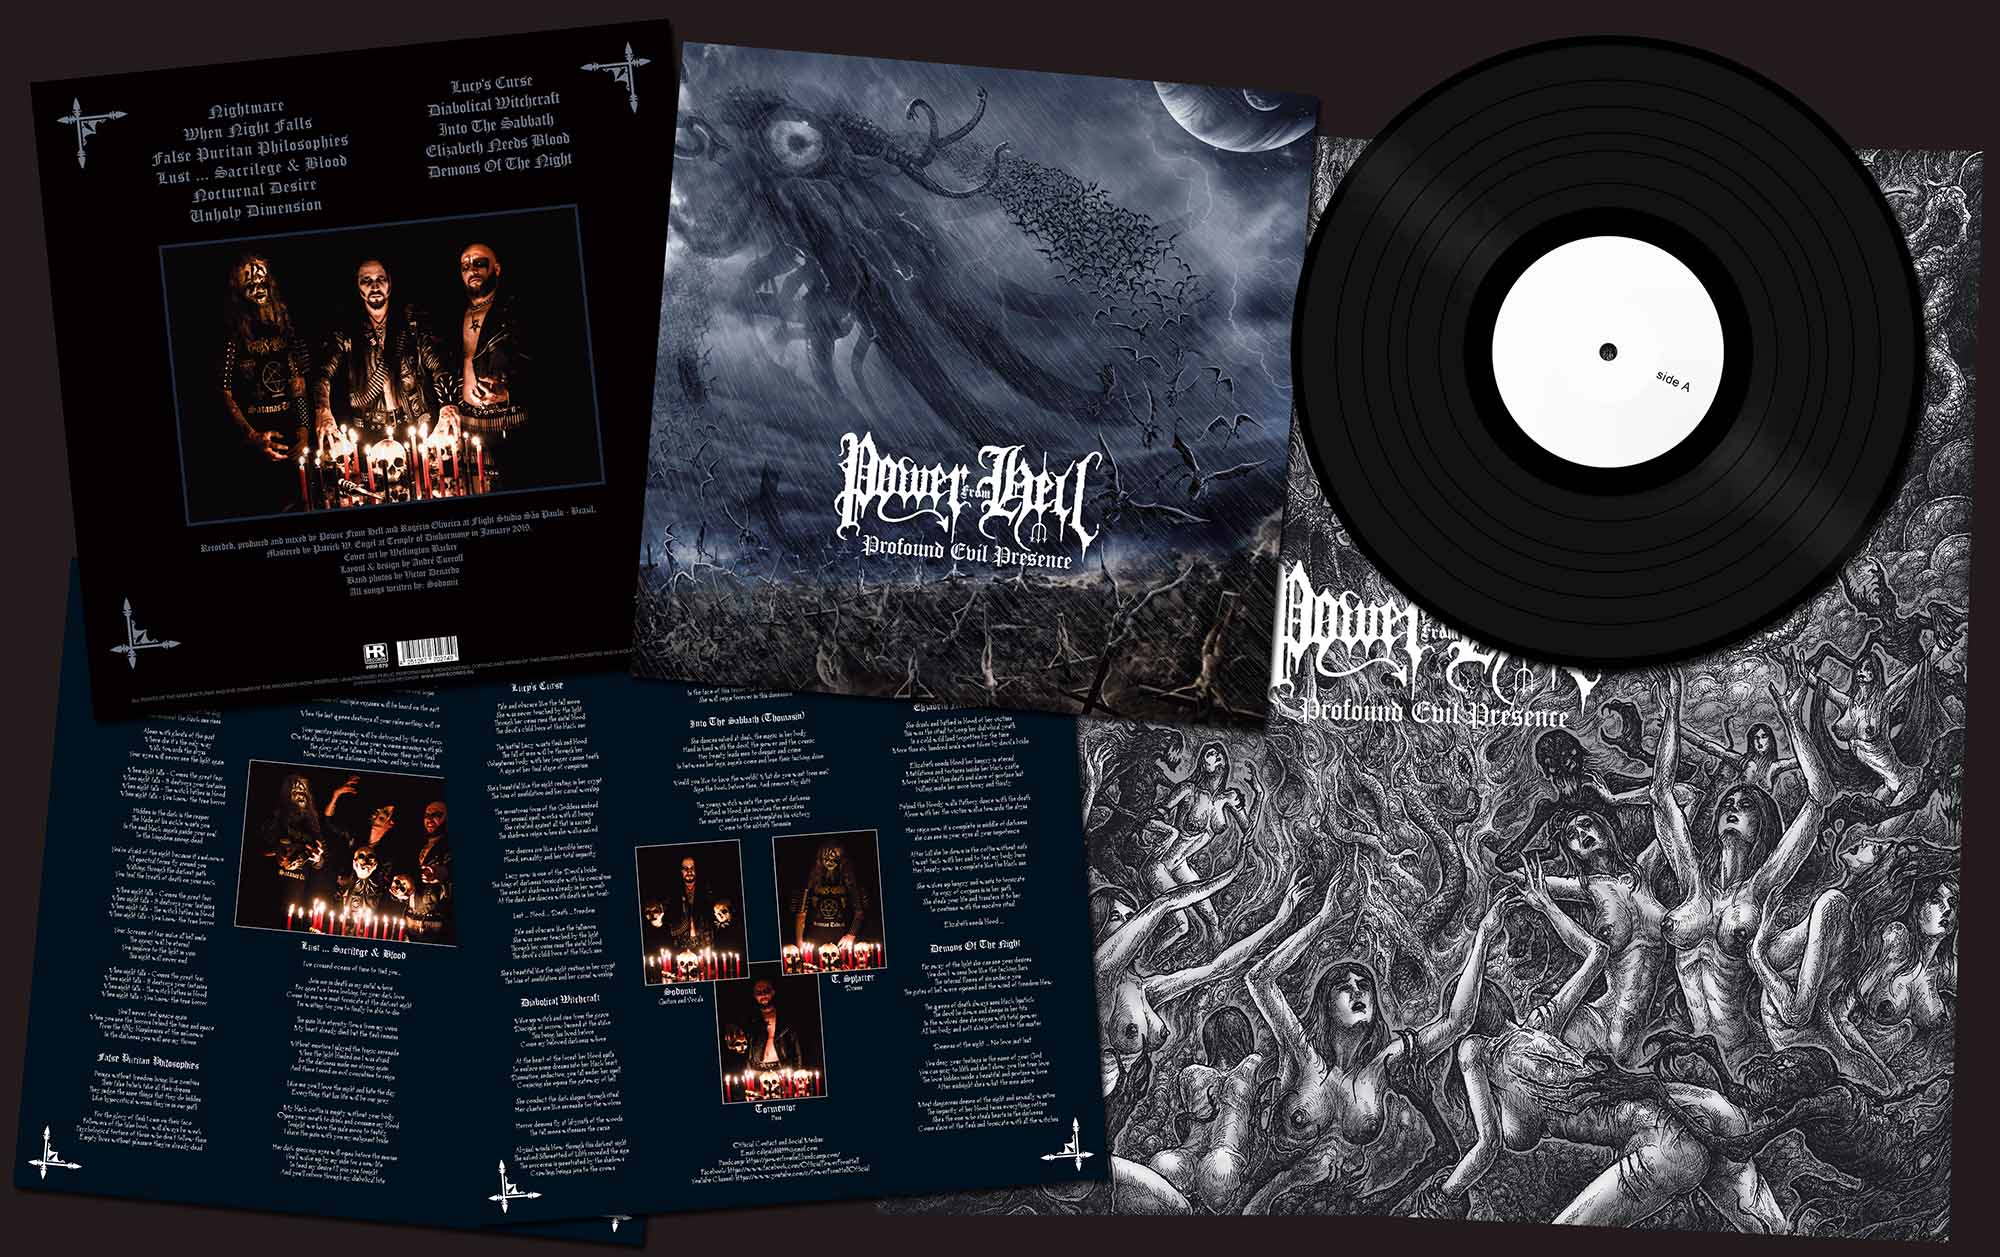 POWER FROM HELL - Profound Evil Presence  LP